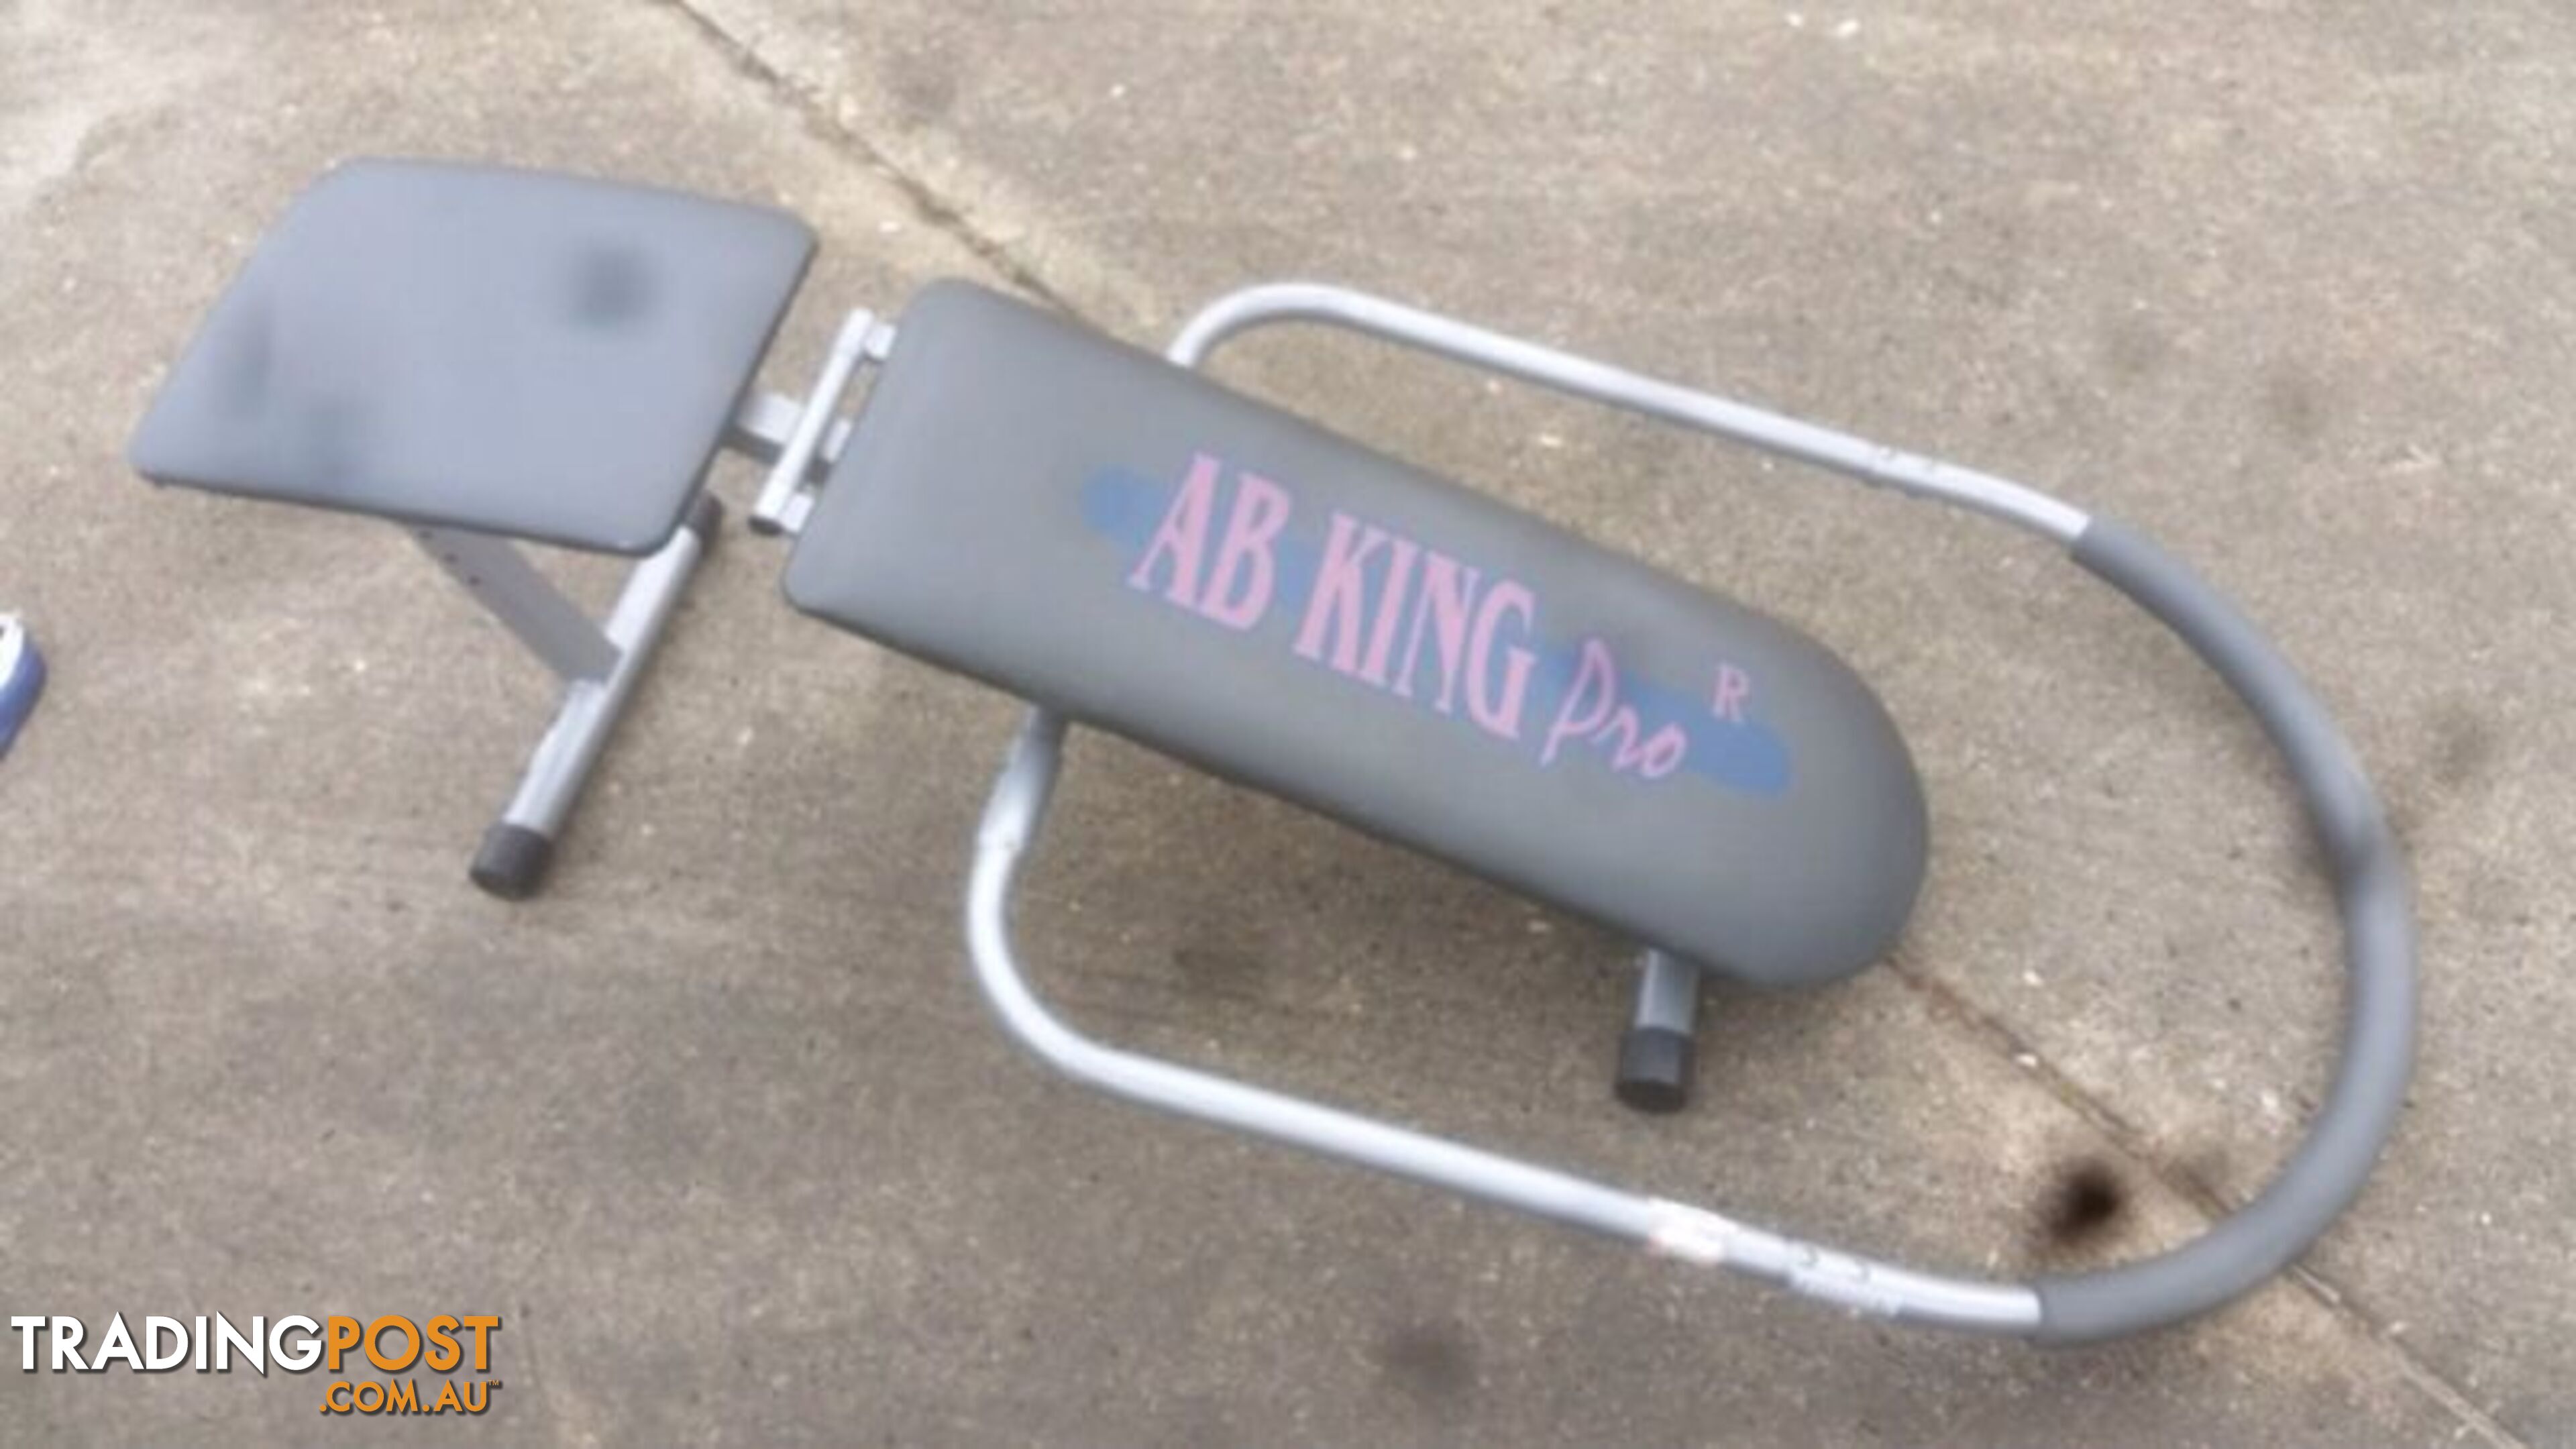 AB KING PRO AS NEW